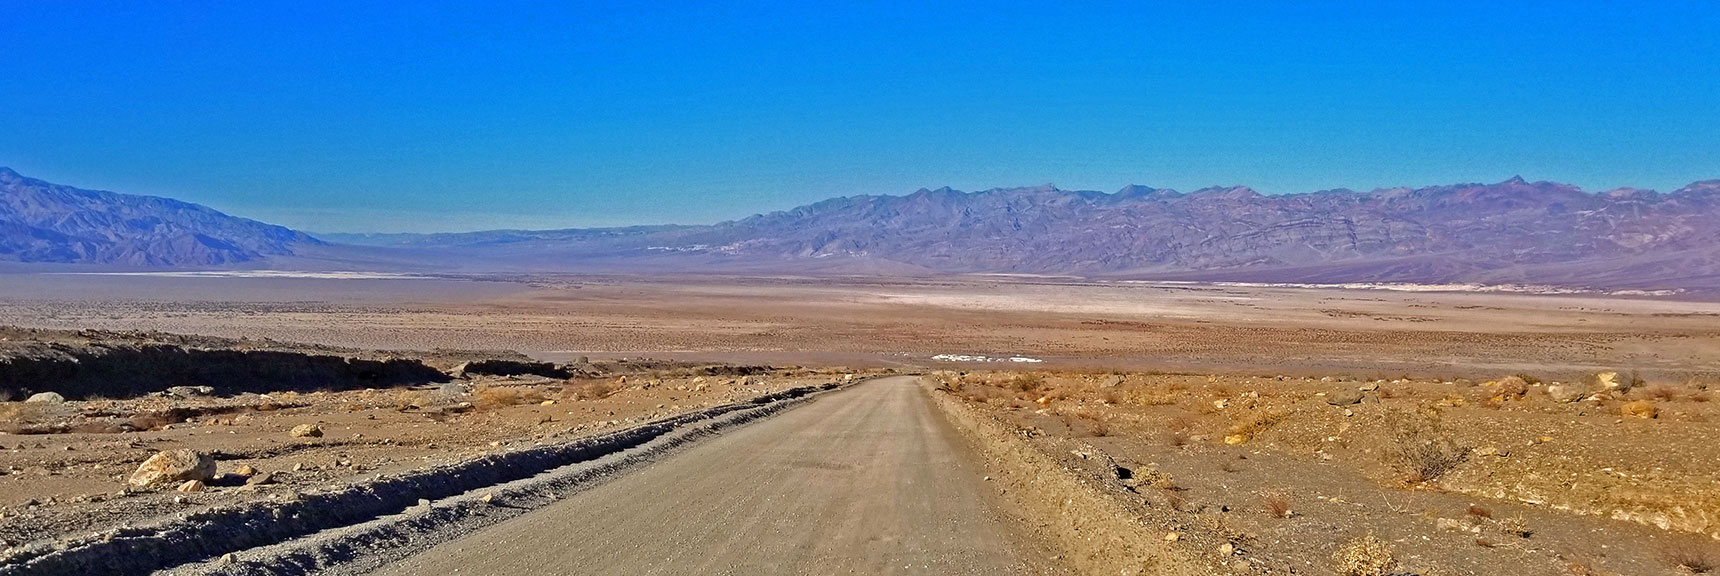 View North Back Down to Stovepipe Wells | Mosaic Canyon, Above Stovepipe Wells, Death Valley National Park, California